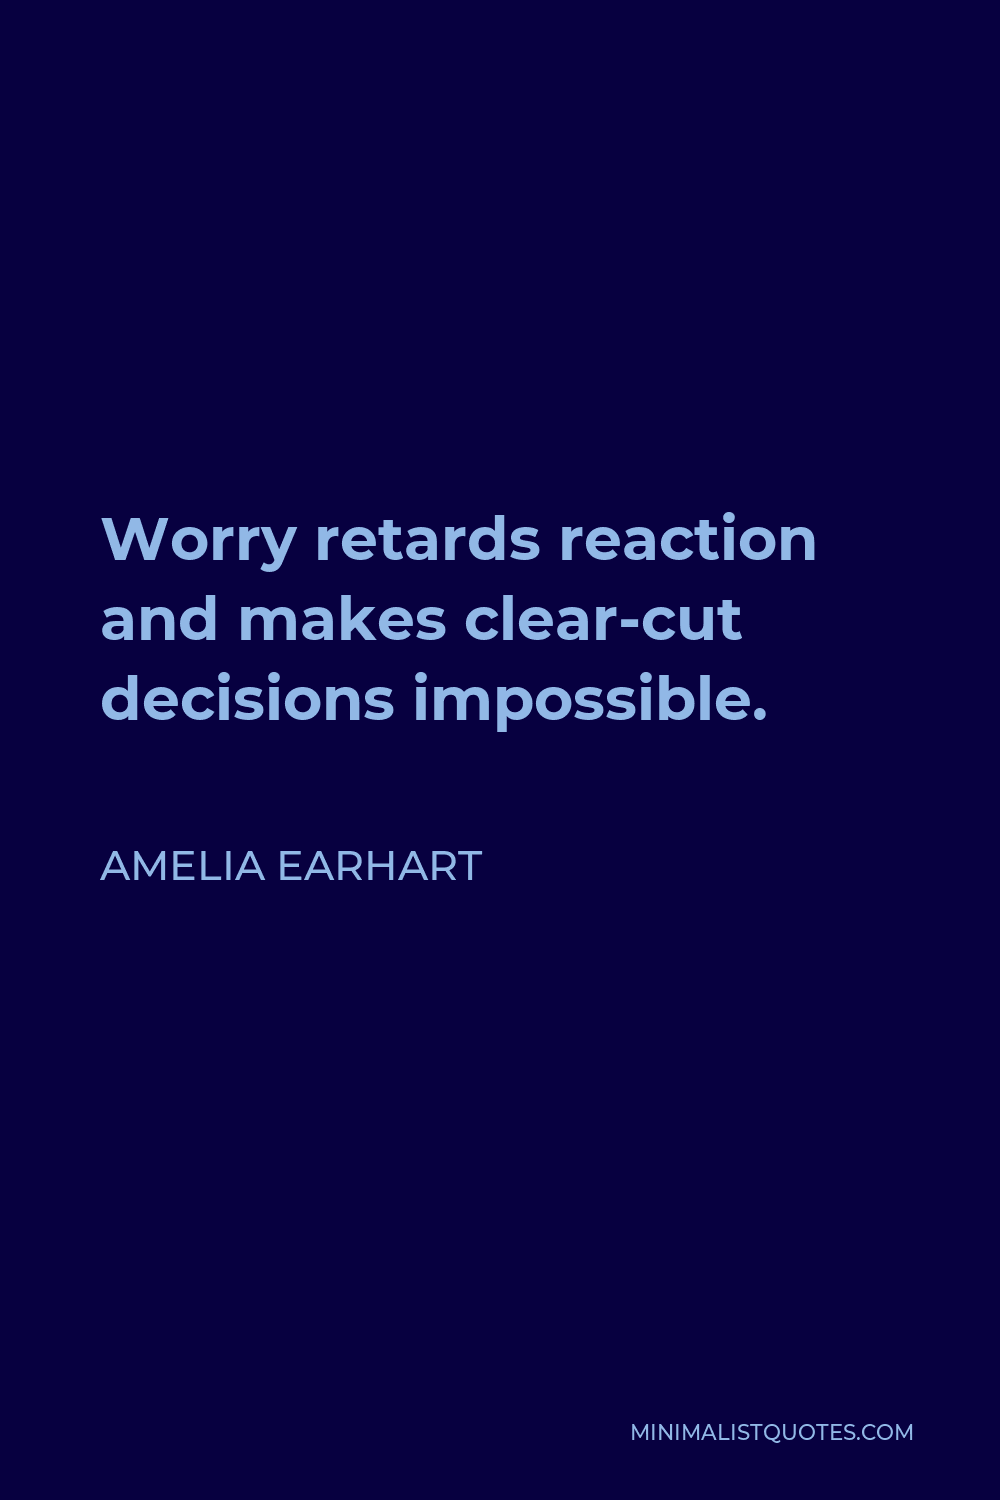 Amelia Earhart Quote: Worry retards reaction and makes clear-cut decisions  impossible.